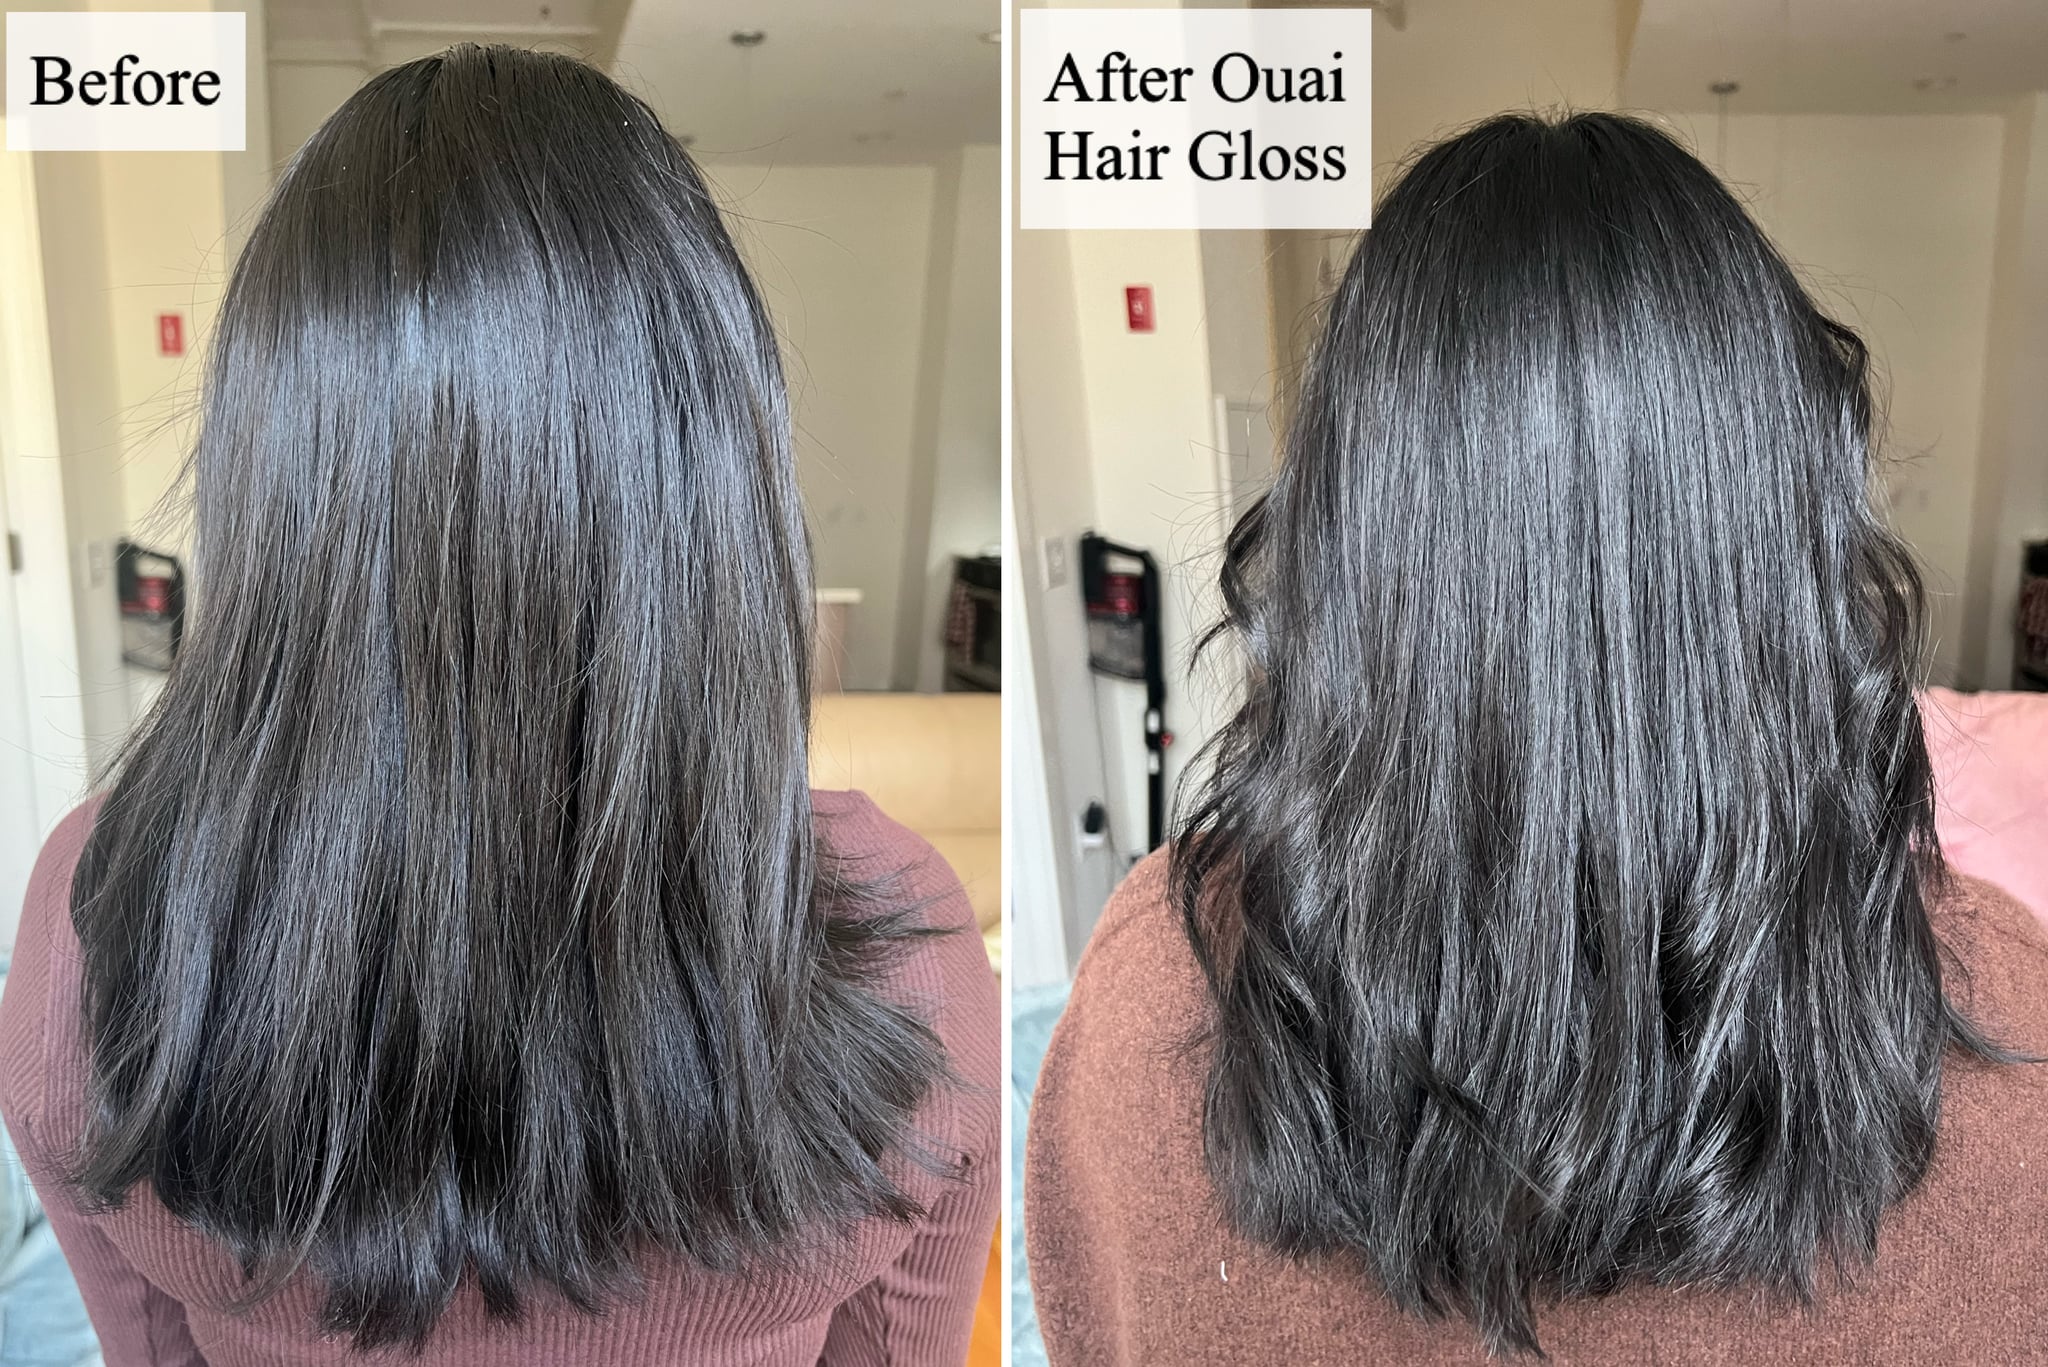 Before and after using the Ouai Hair Gloss.